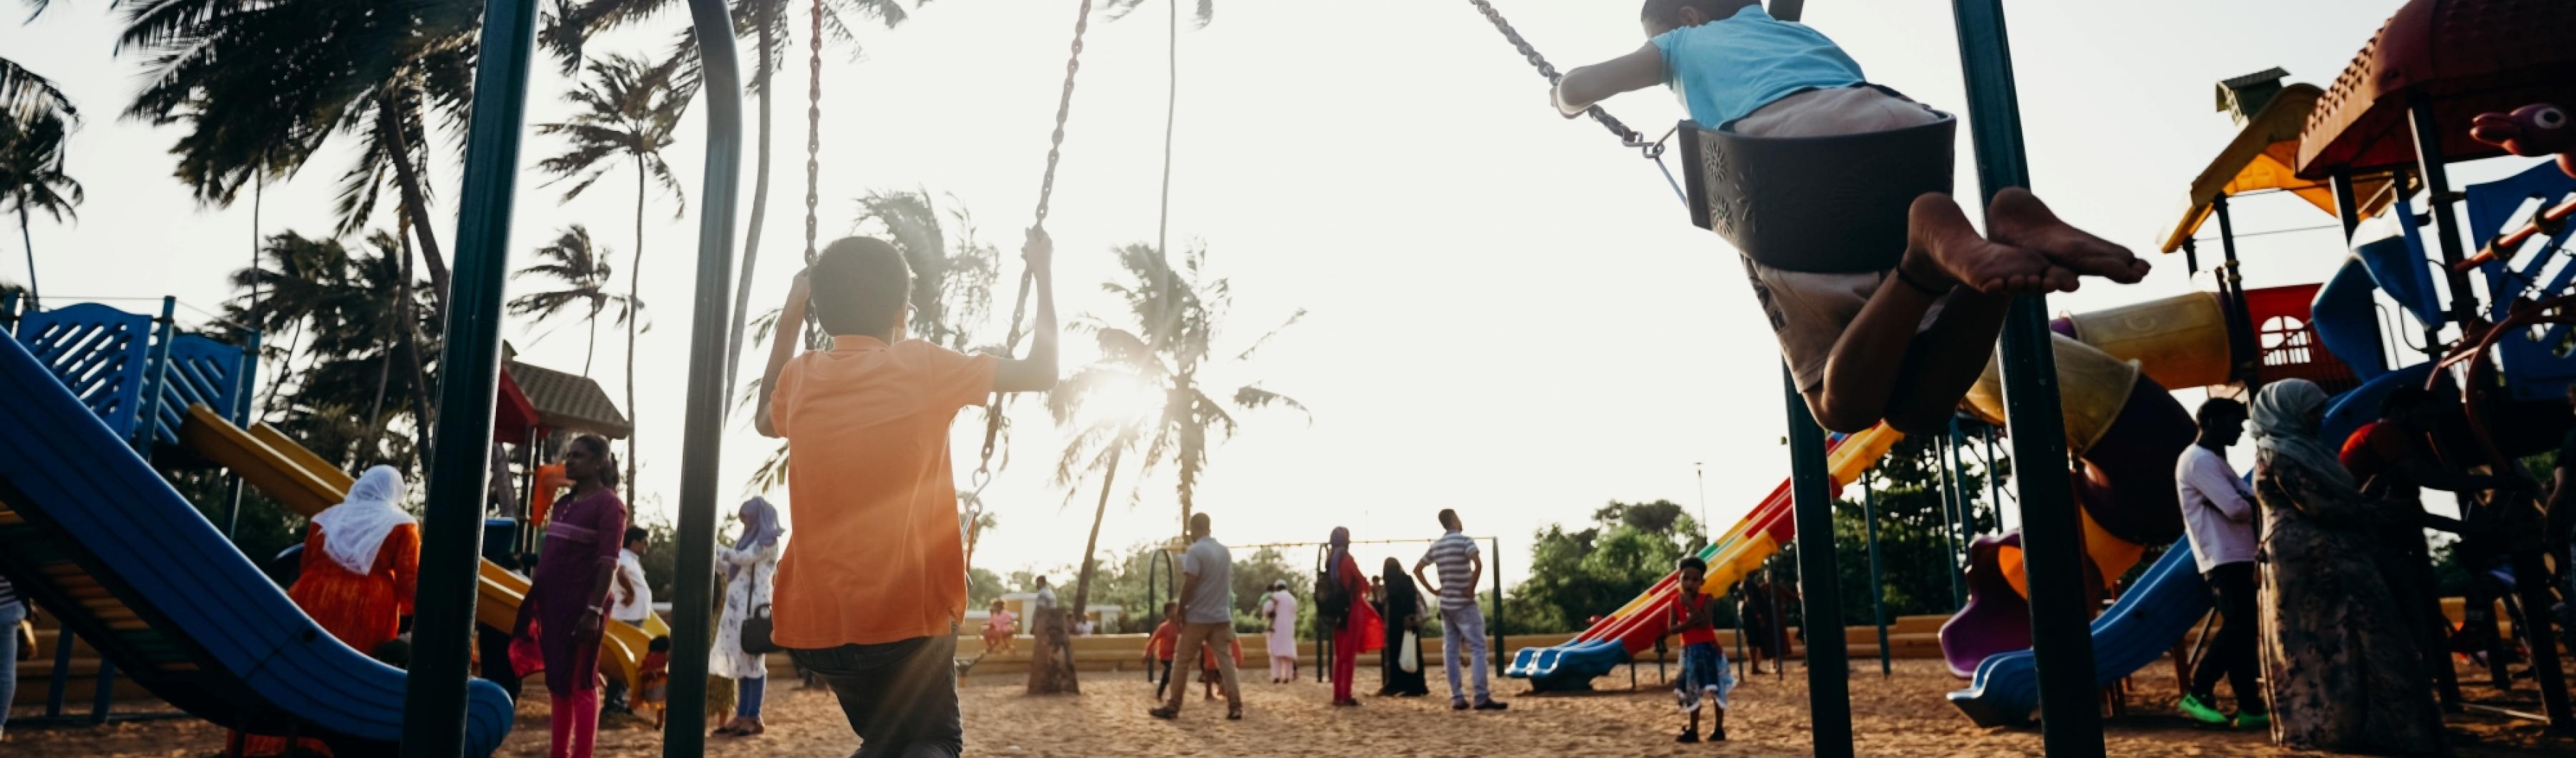 Children playing on swings in a neighborhood park lined with trees